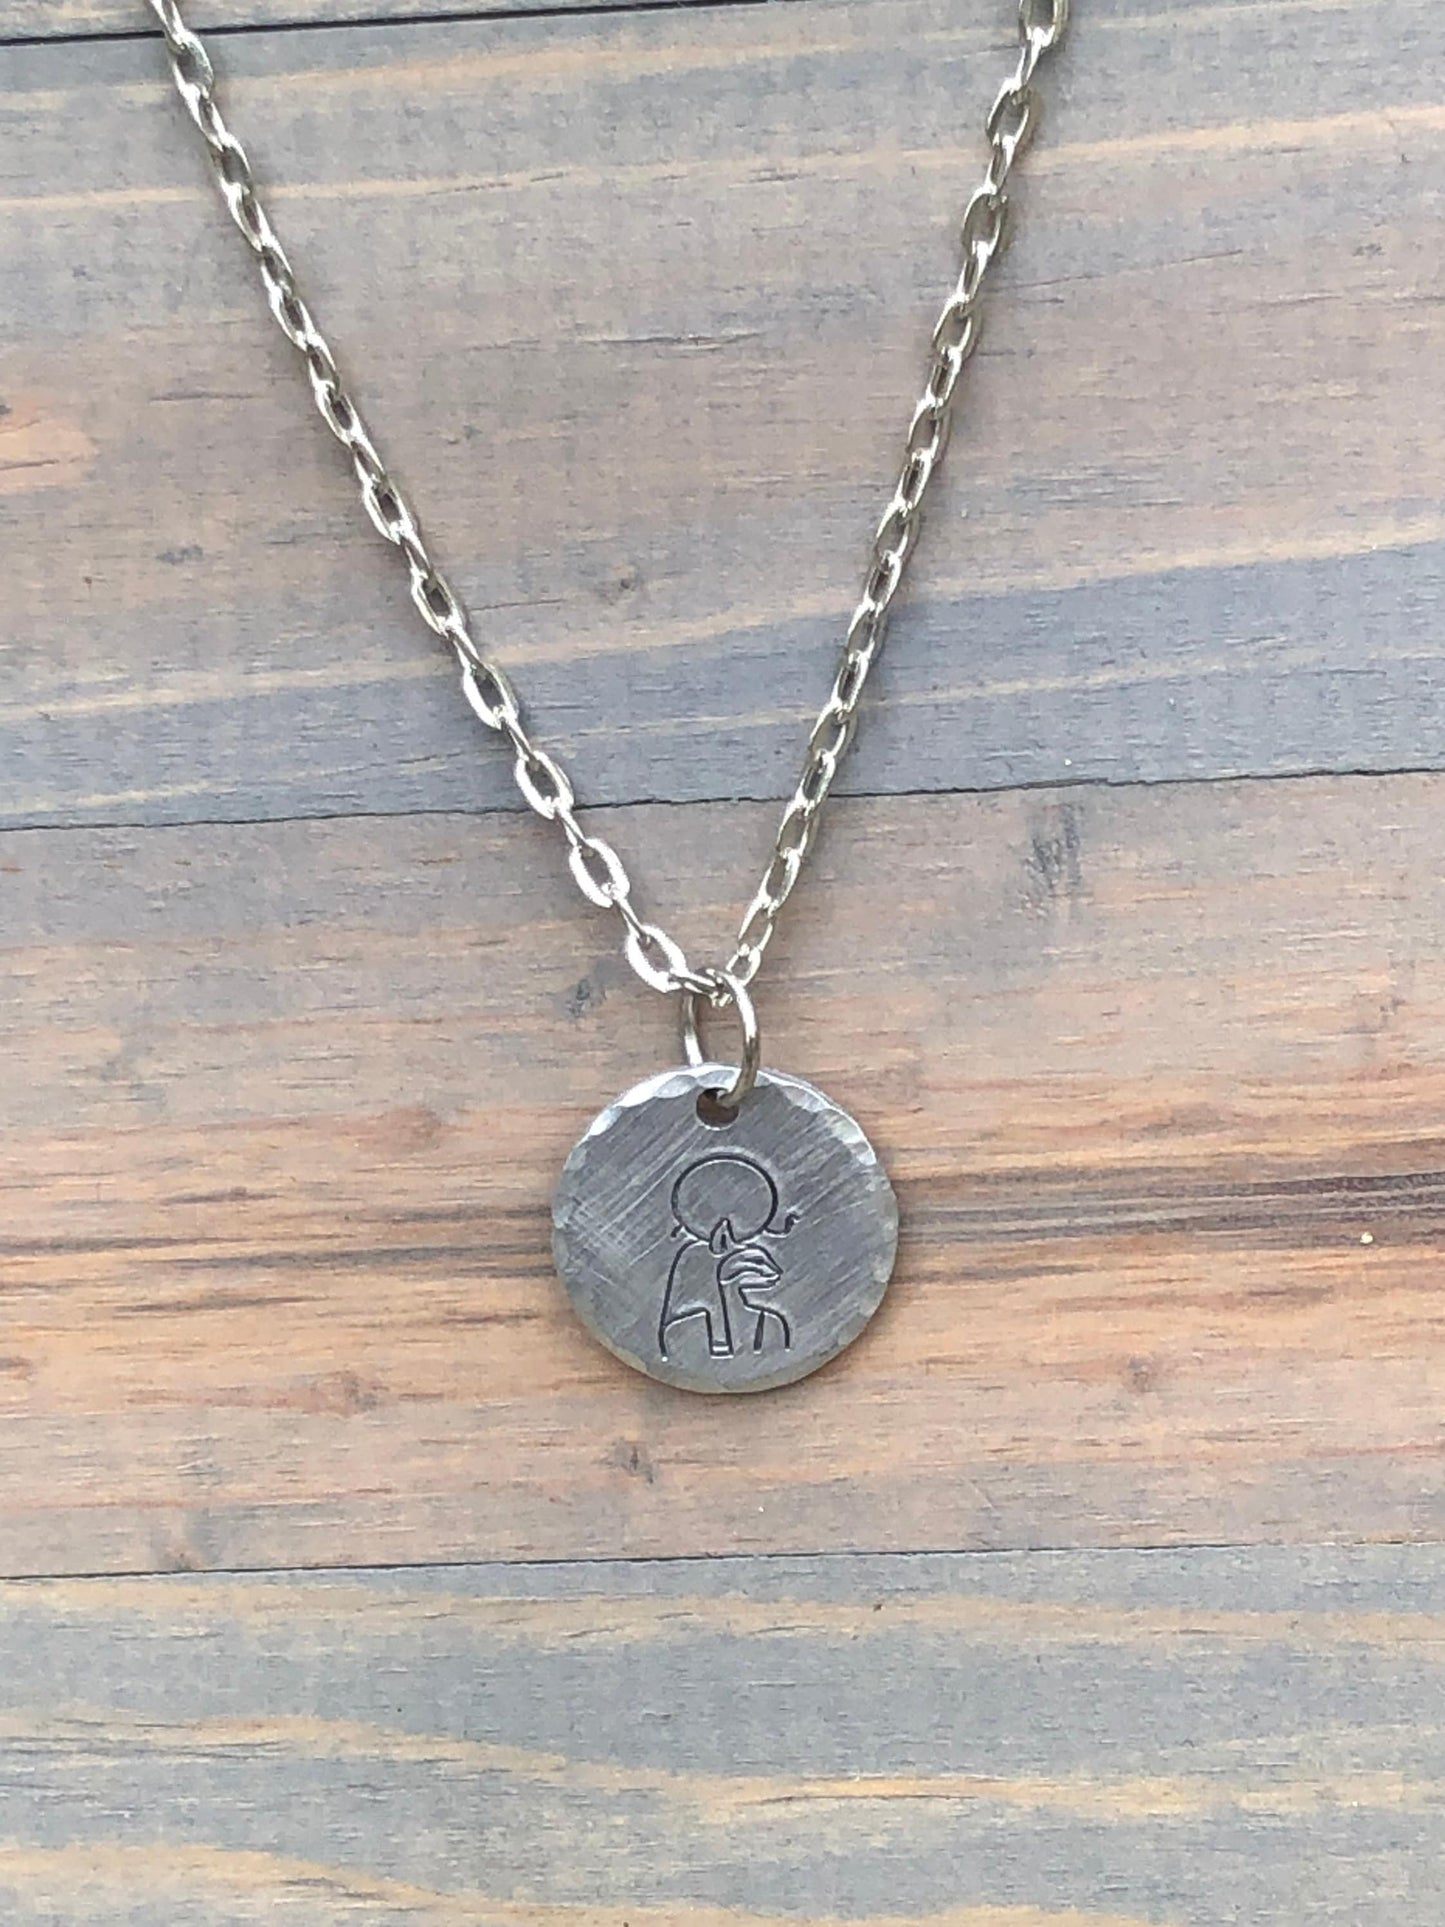 Bastet Necklace- Gift for Doula - Midwife Gift - Thank you Gift for Doula - Personalized Necklace - Goddess of Childbirth & Love - Custom